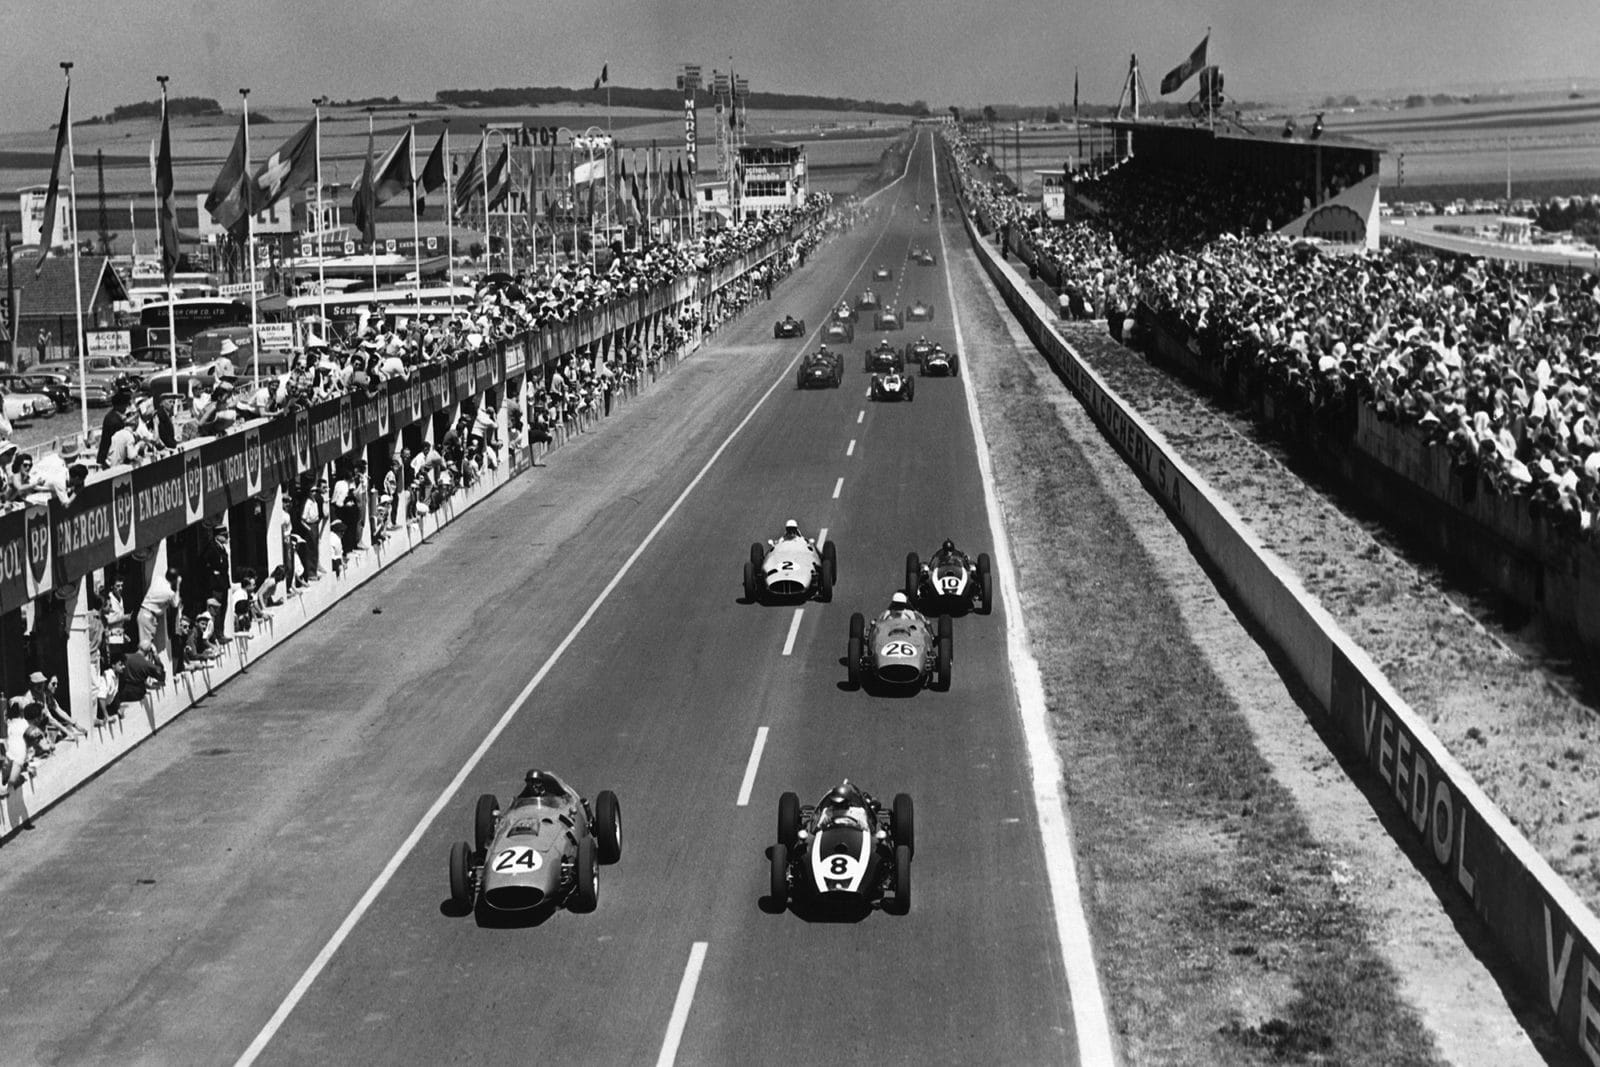 Tony Brooks, #24 Ferrari Dino 246 and Jack Brabham in a Cooper T51-Climax lead at the start.